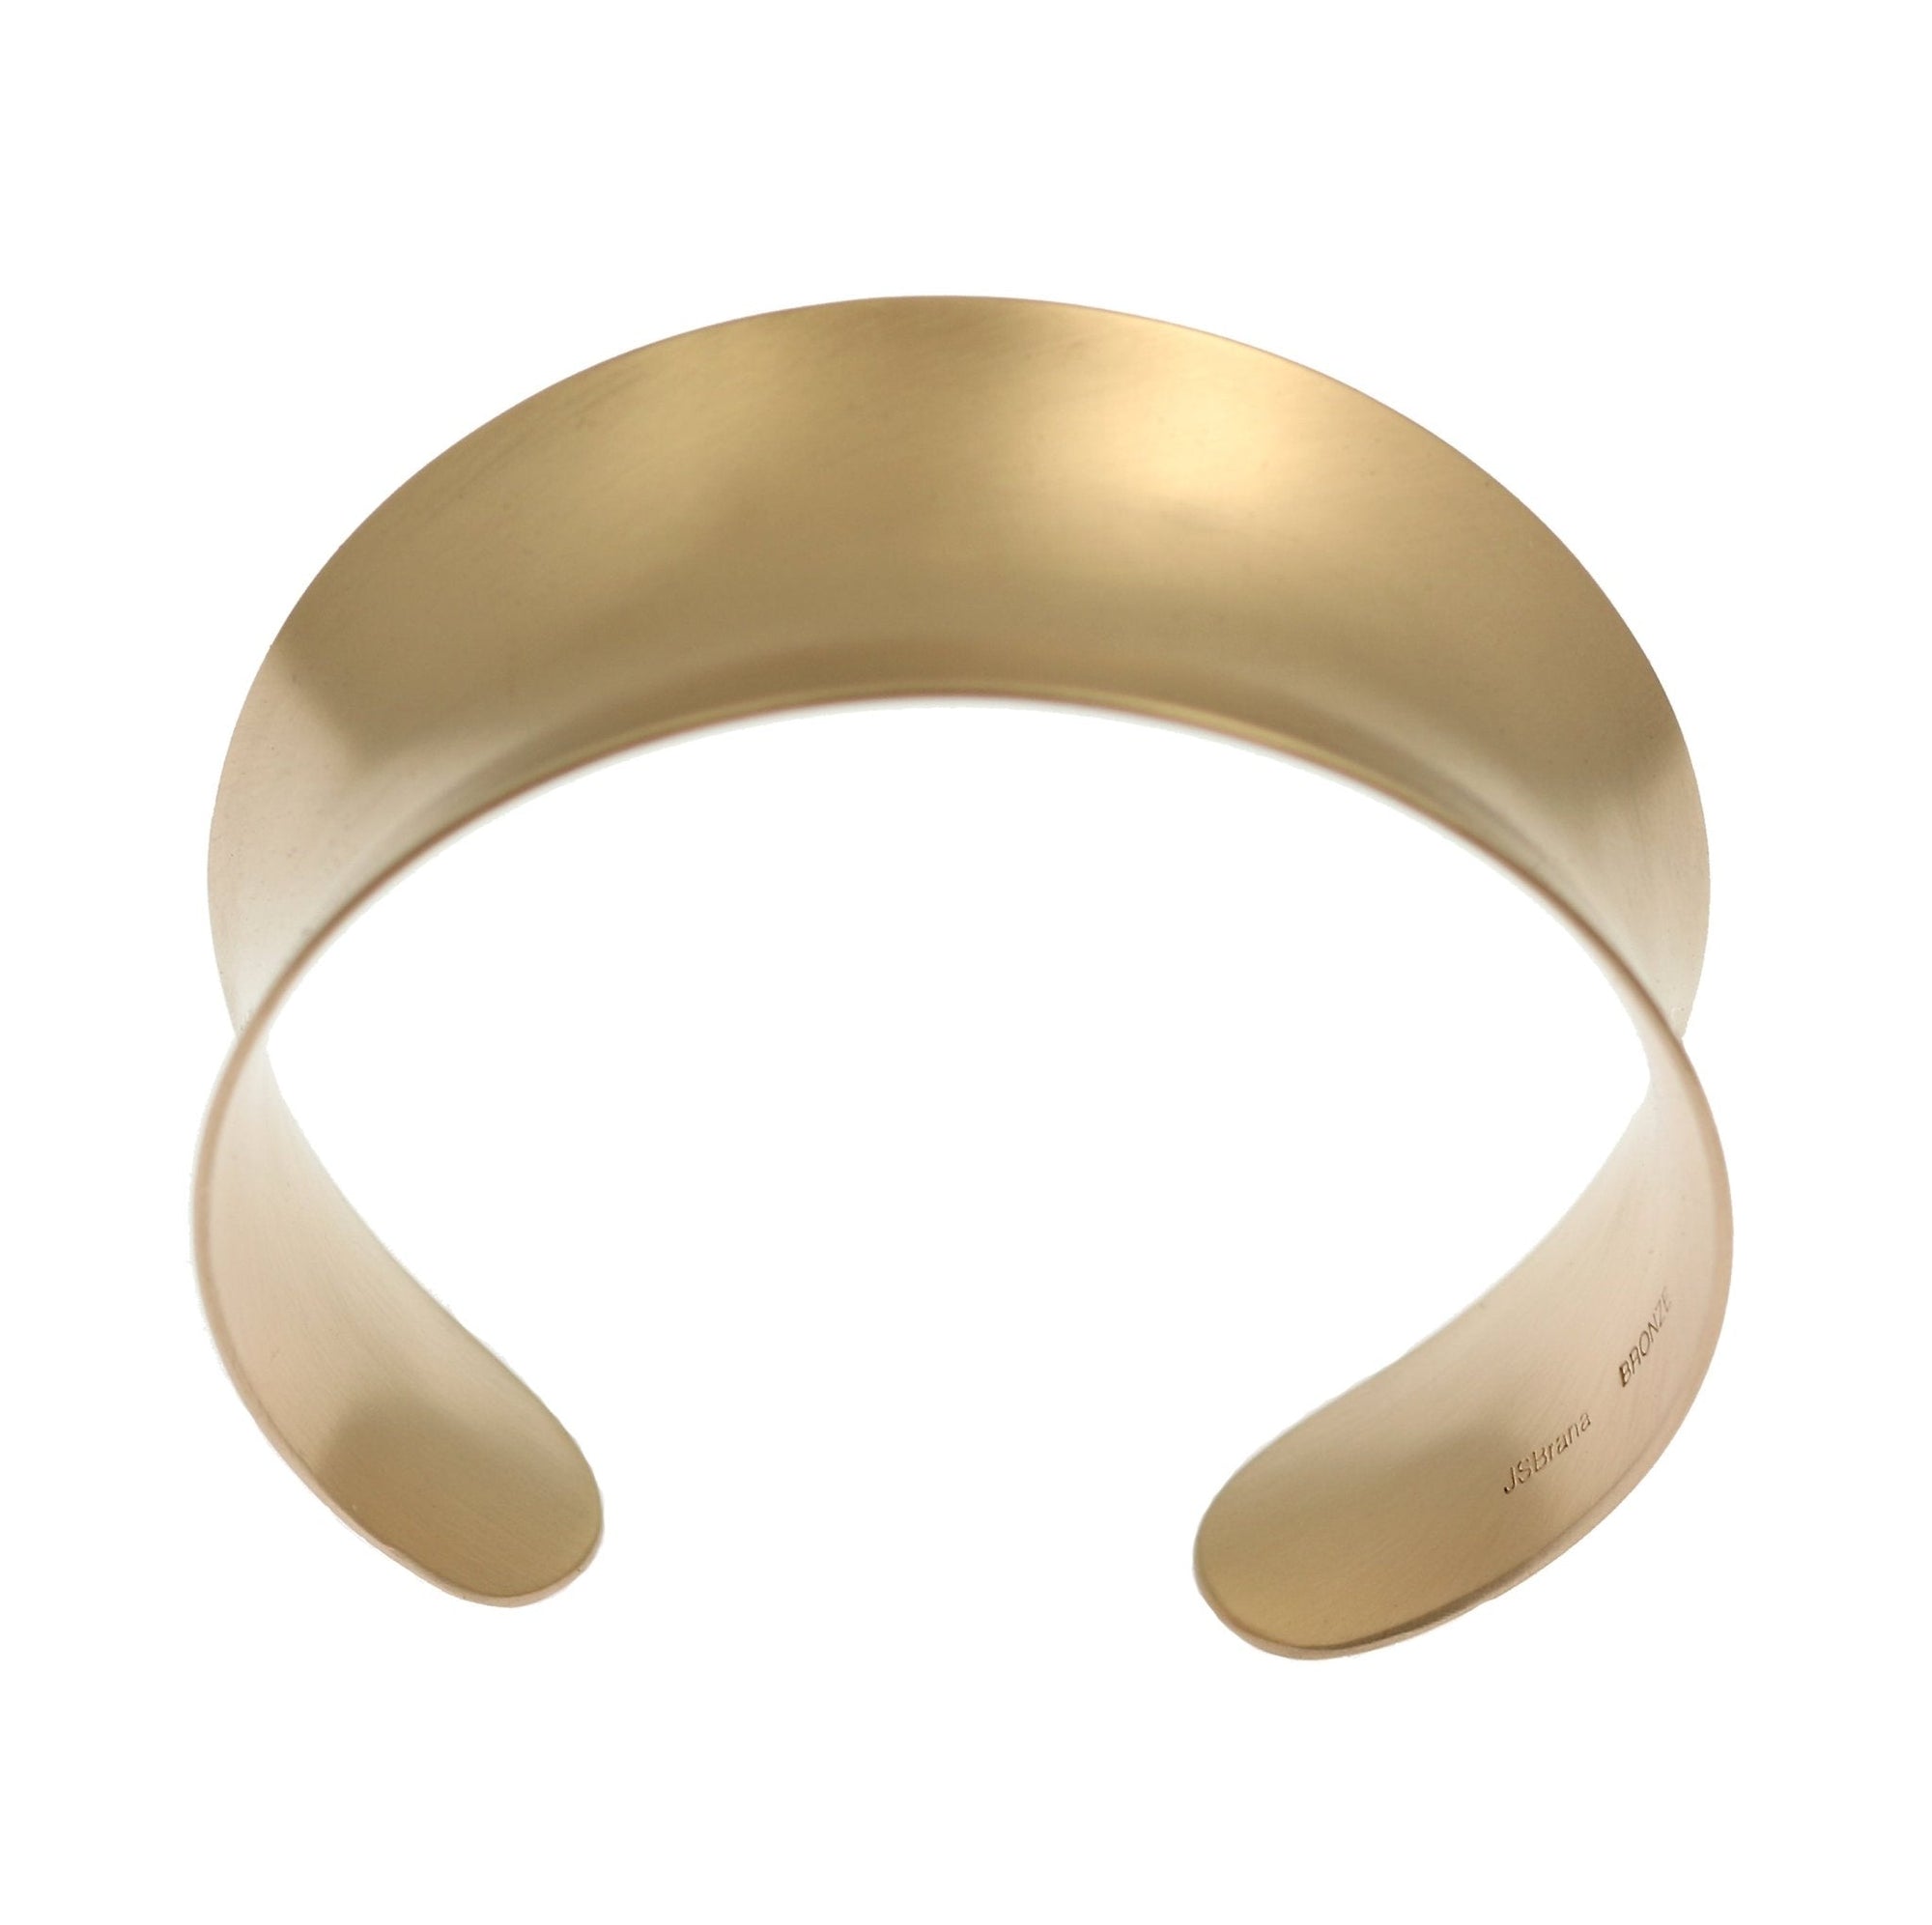 Top View of Brushed Bronze Anticlastic Cuff